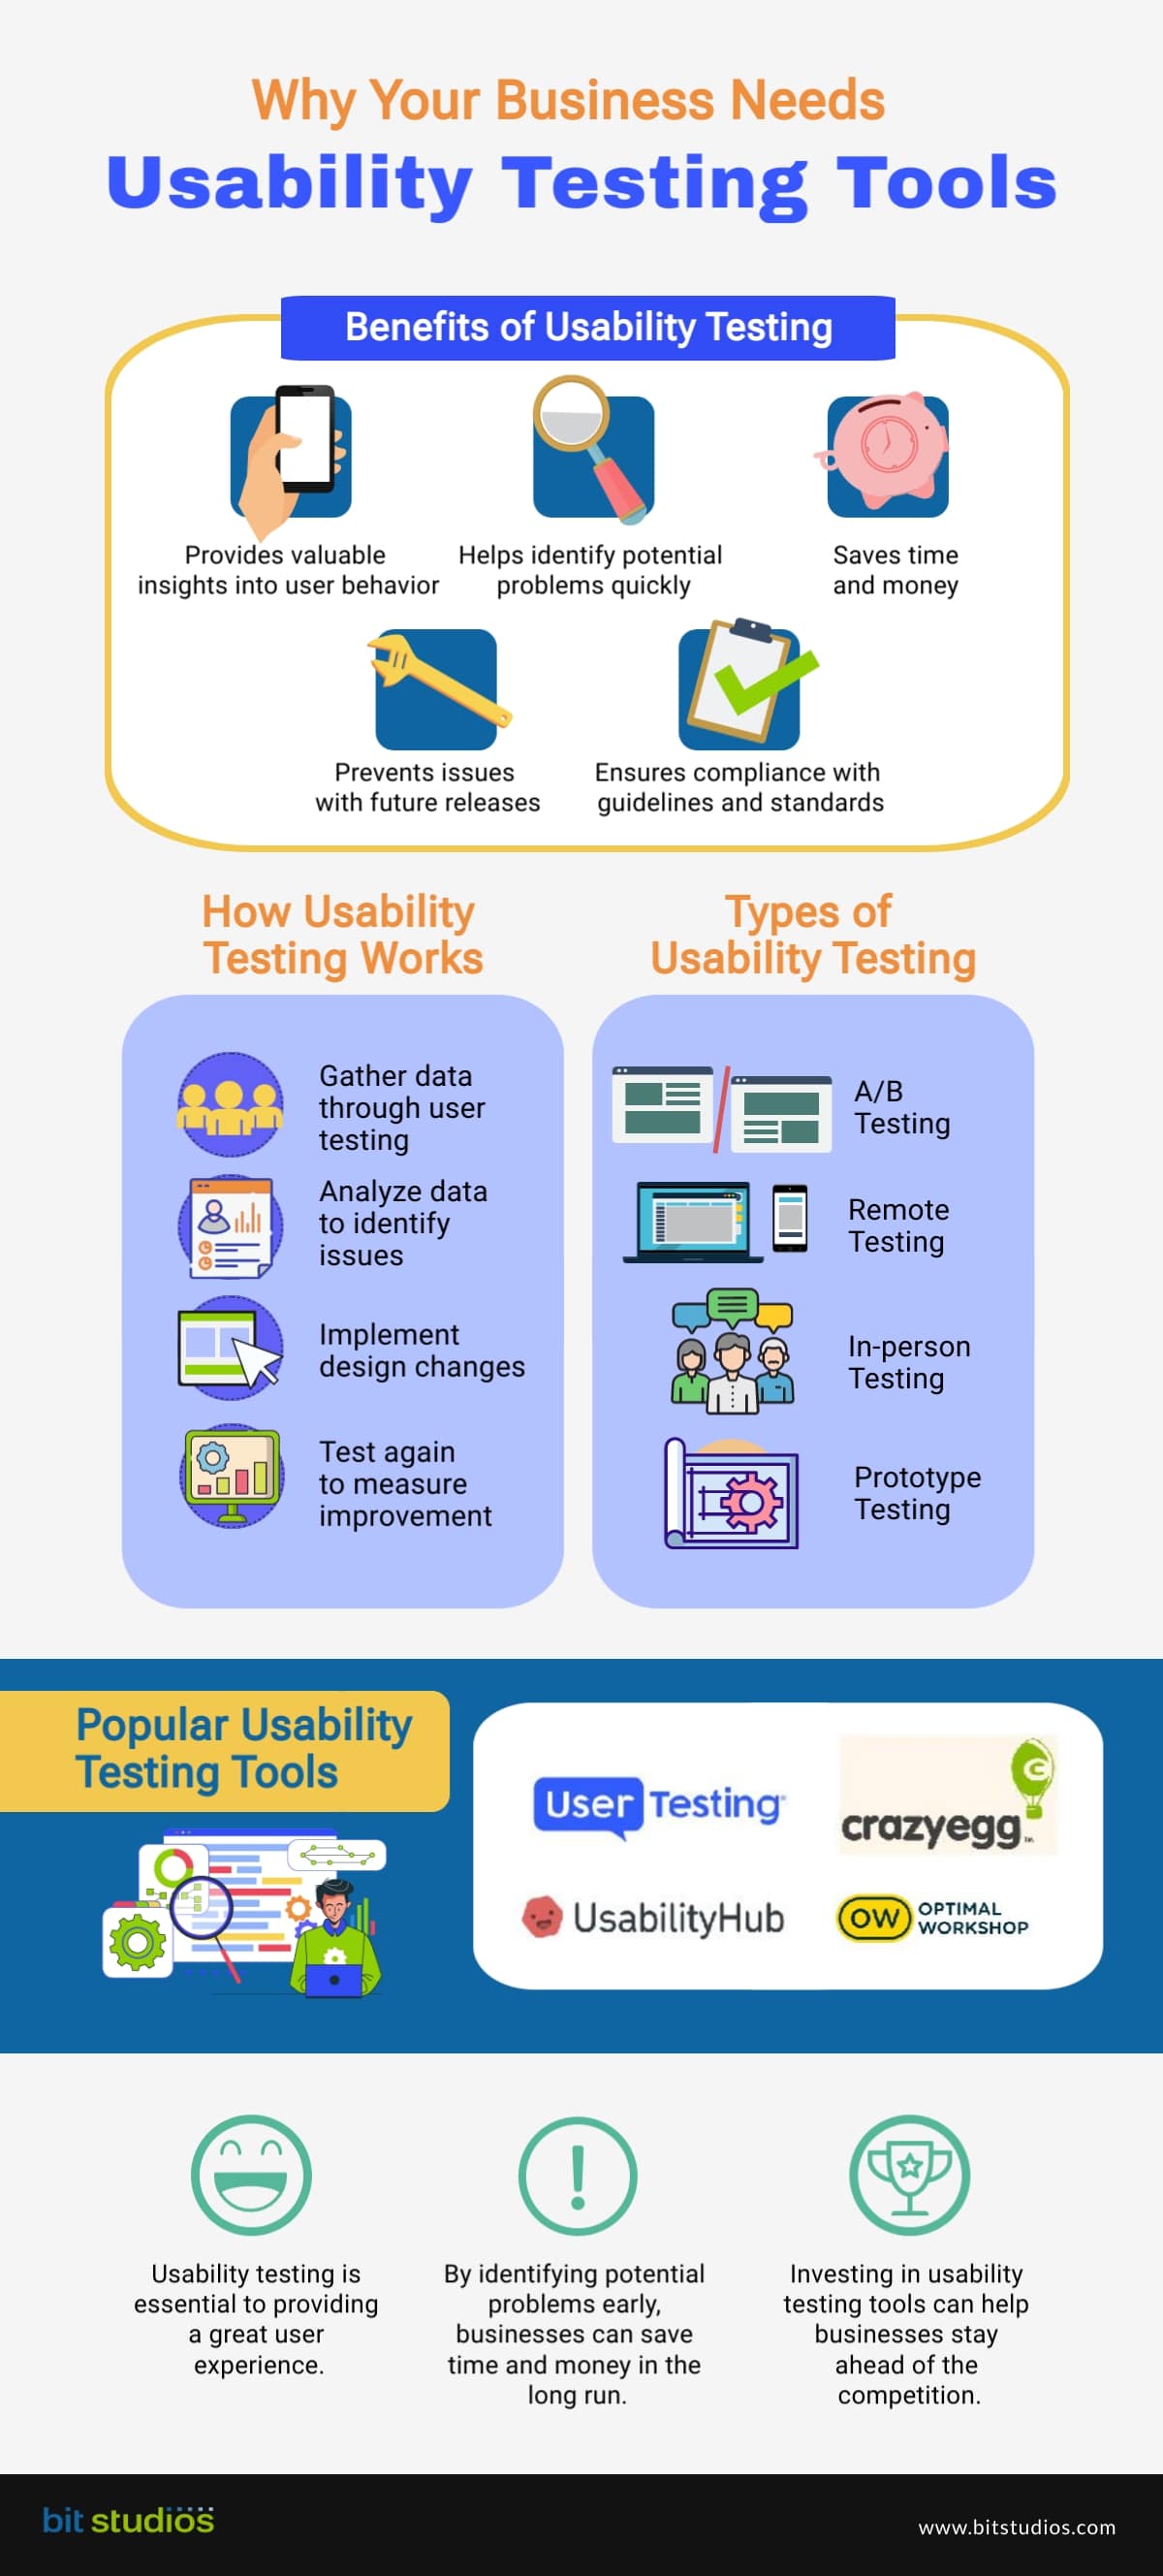 First Click testing 101 - with Chalkmark by Optimal Workshop